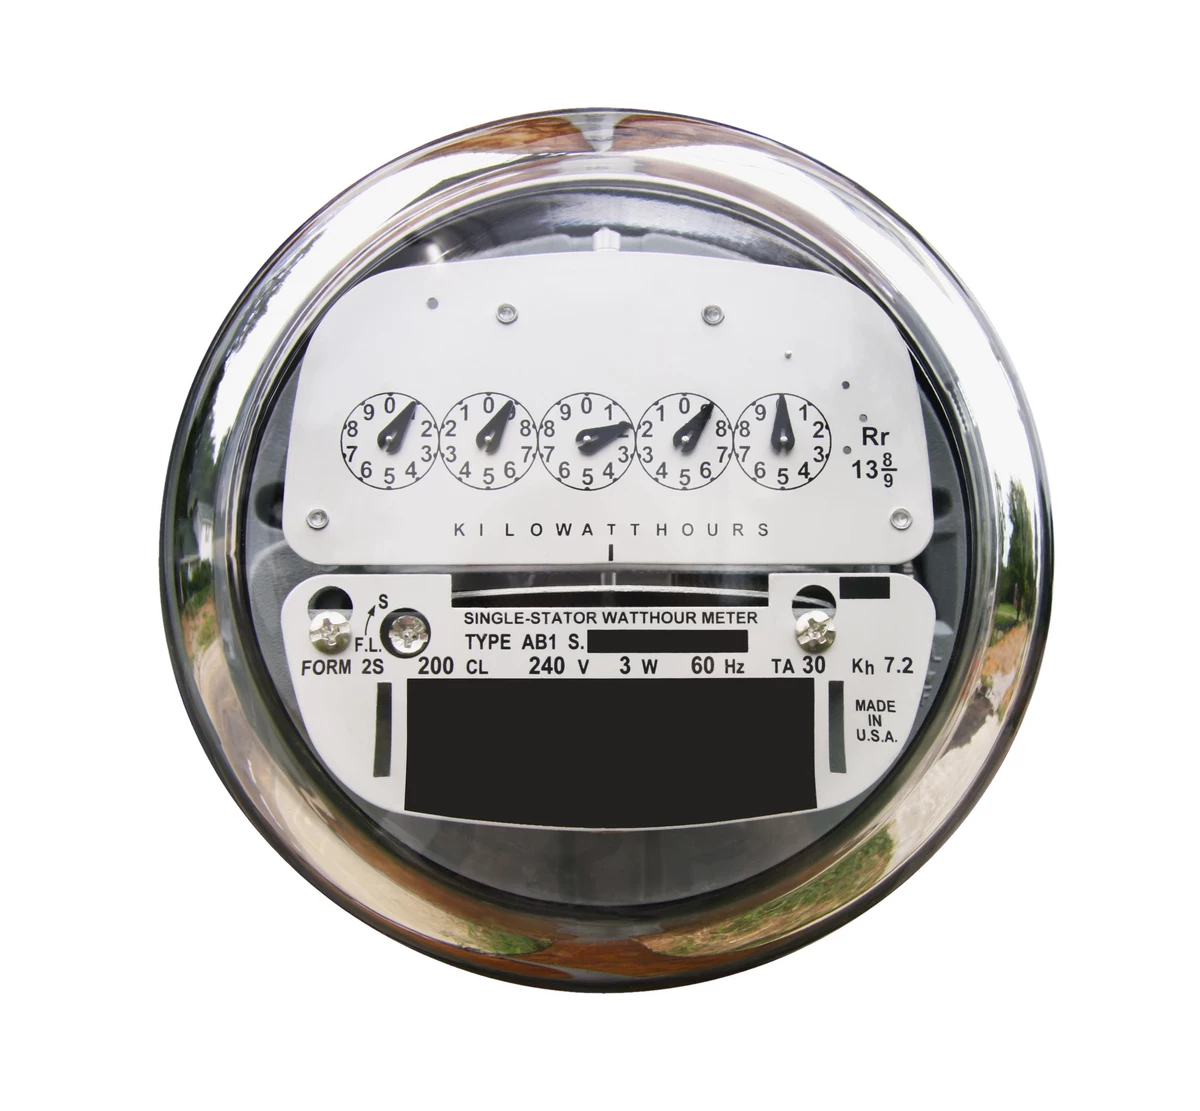 pse-g-gets-green-light-to-provide-smart-meters-for-customers